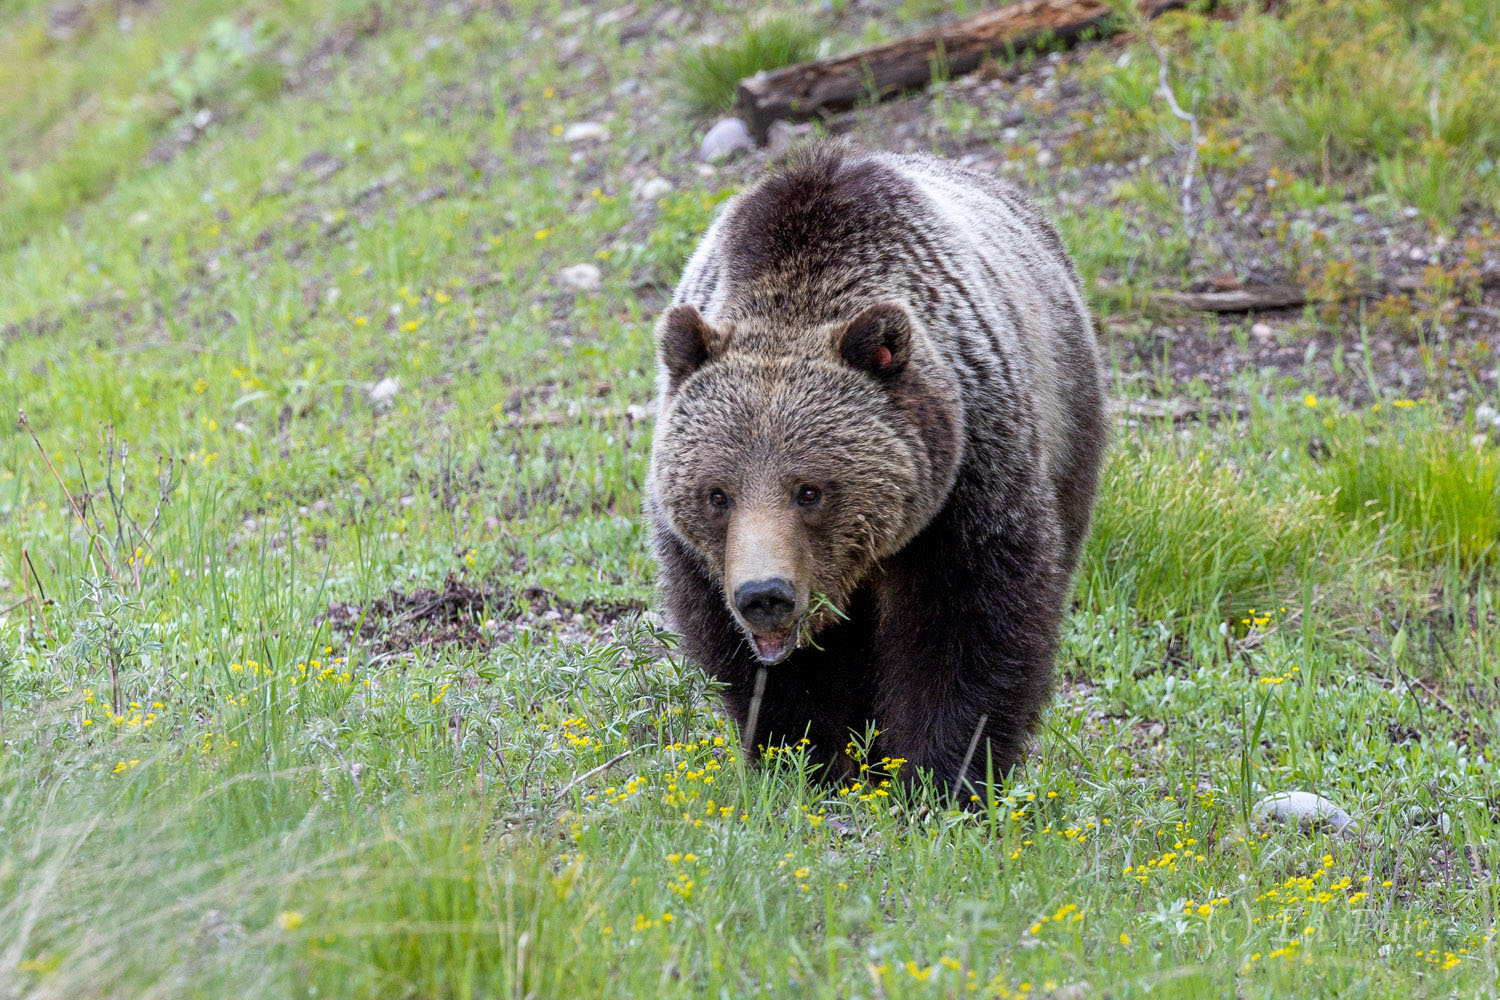 One of the most photogenic bears to have graced Grand Teton National Park, Blondie strolls through a greening meadow in search...